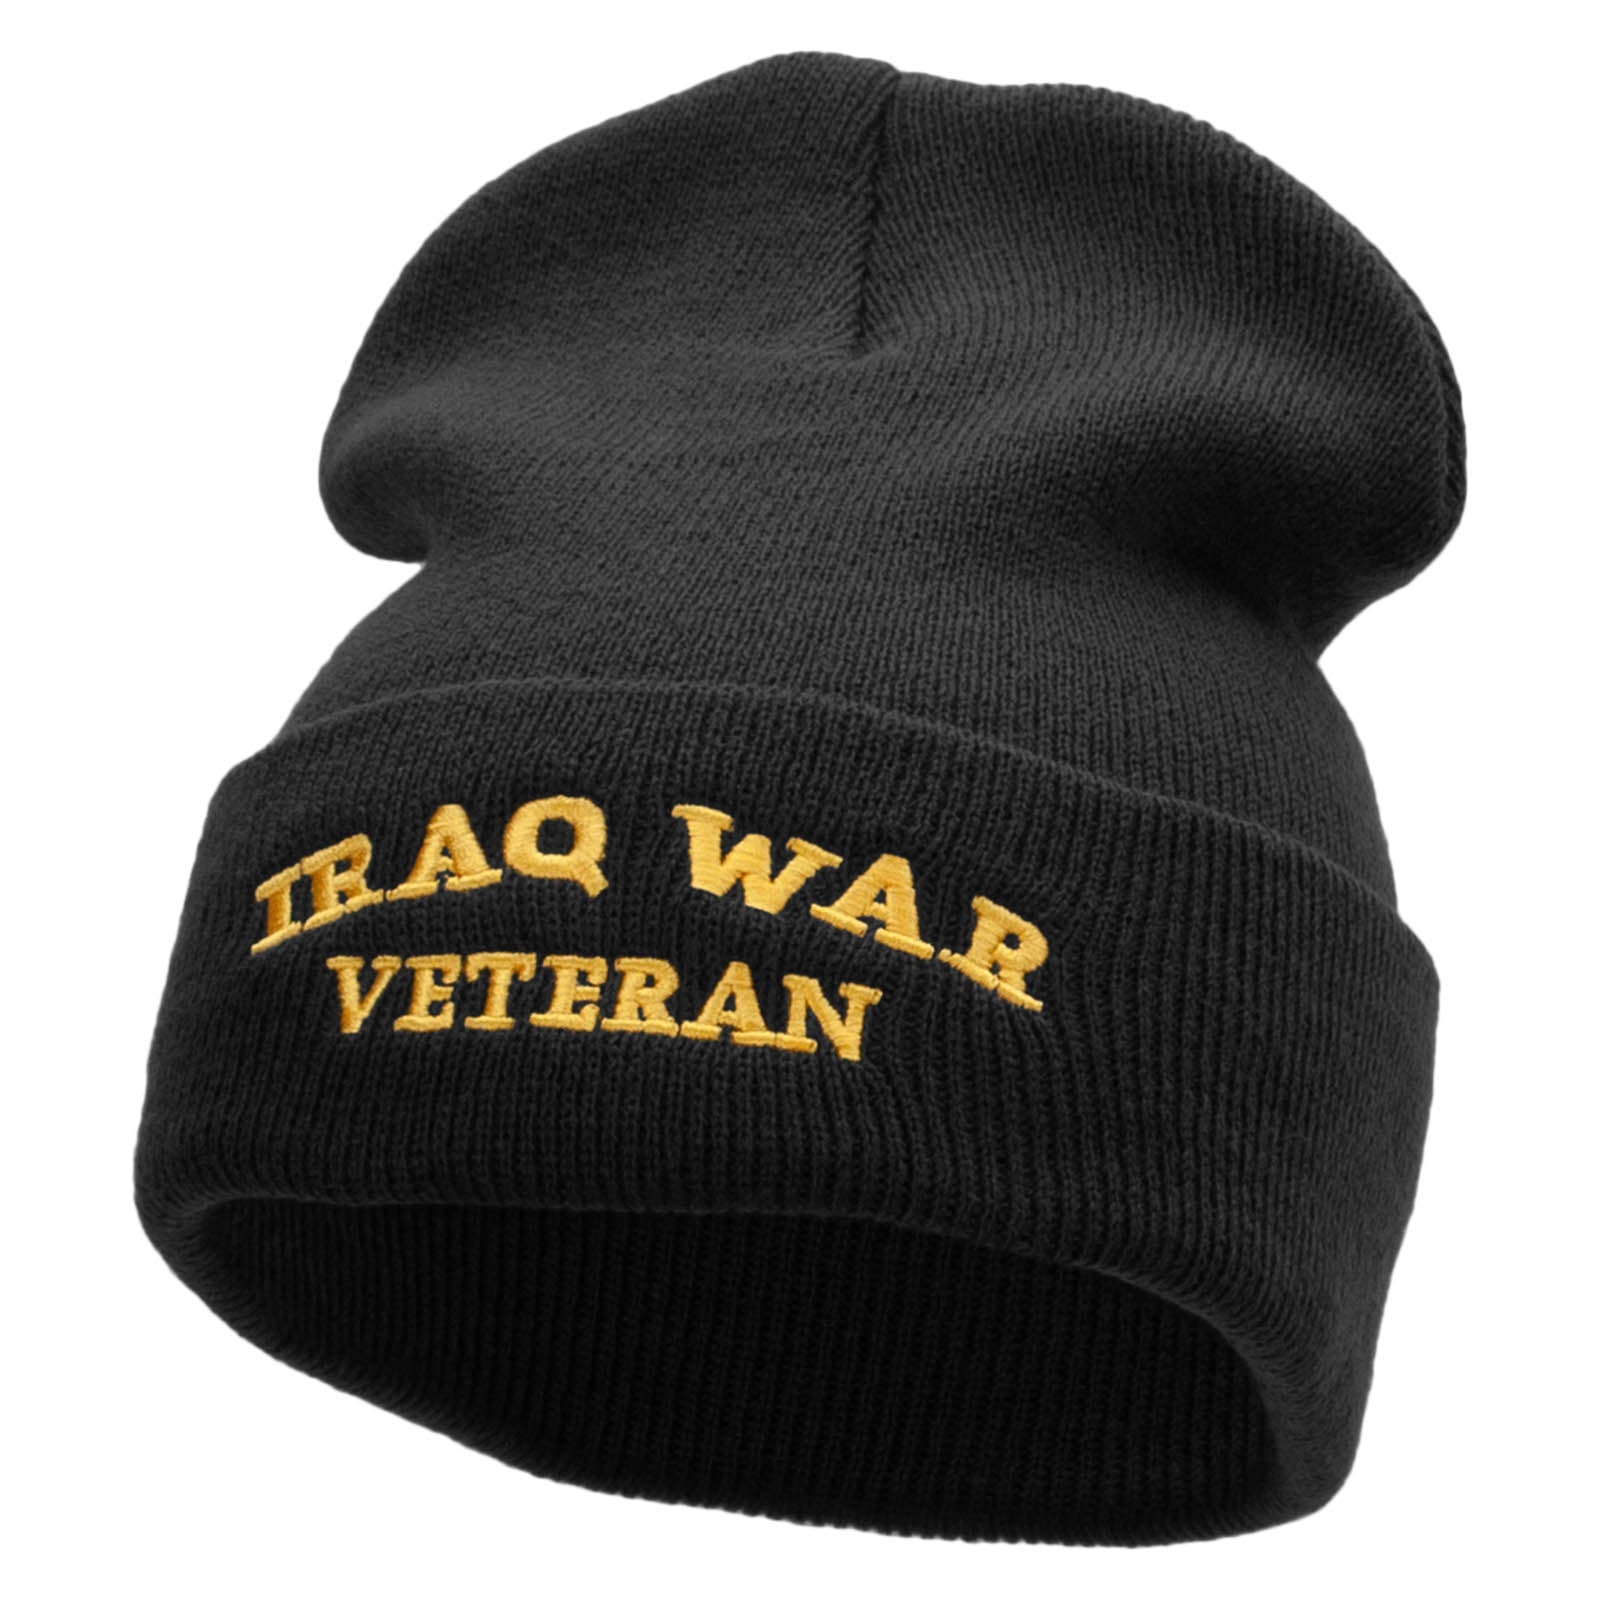 Iraq War Vet Embroidered 12 Inch Solid Long Beanie Made in USA - Black OSFM